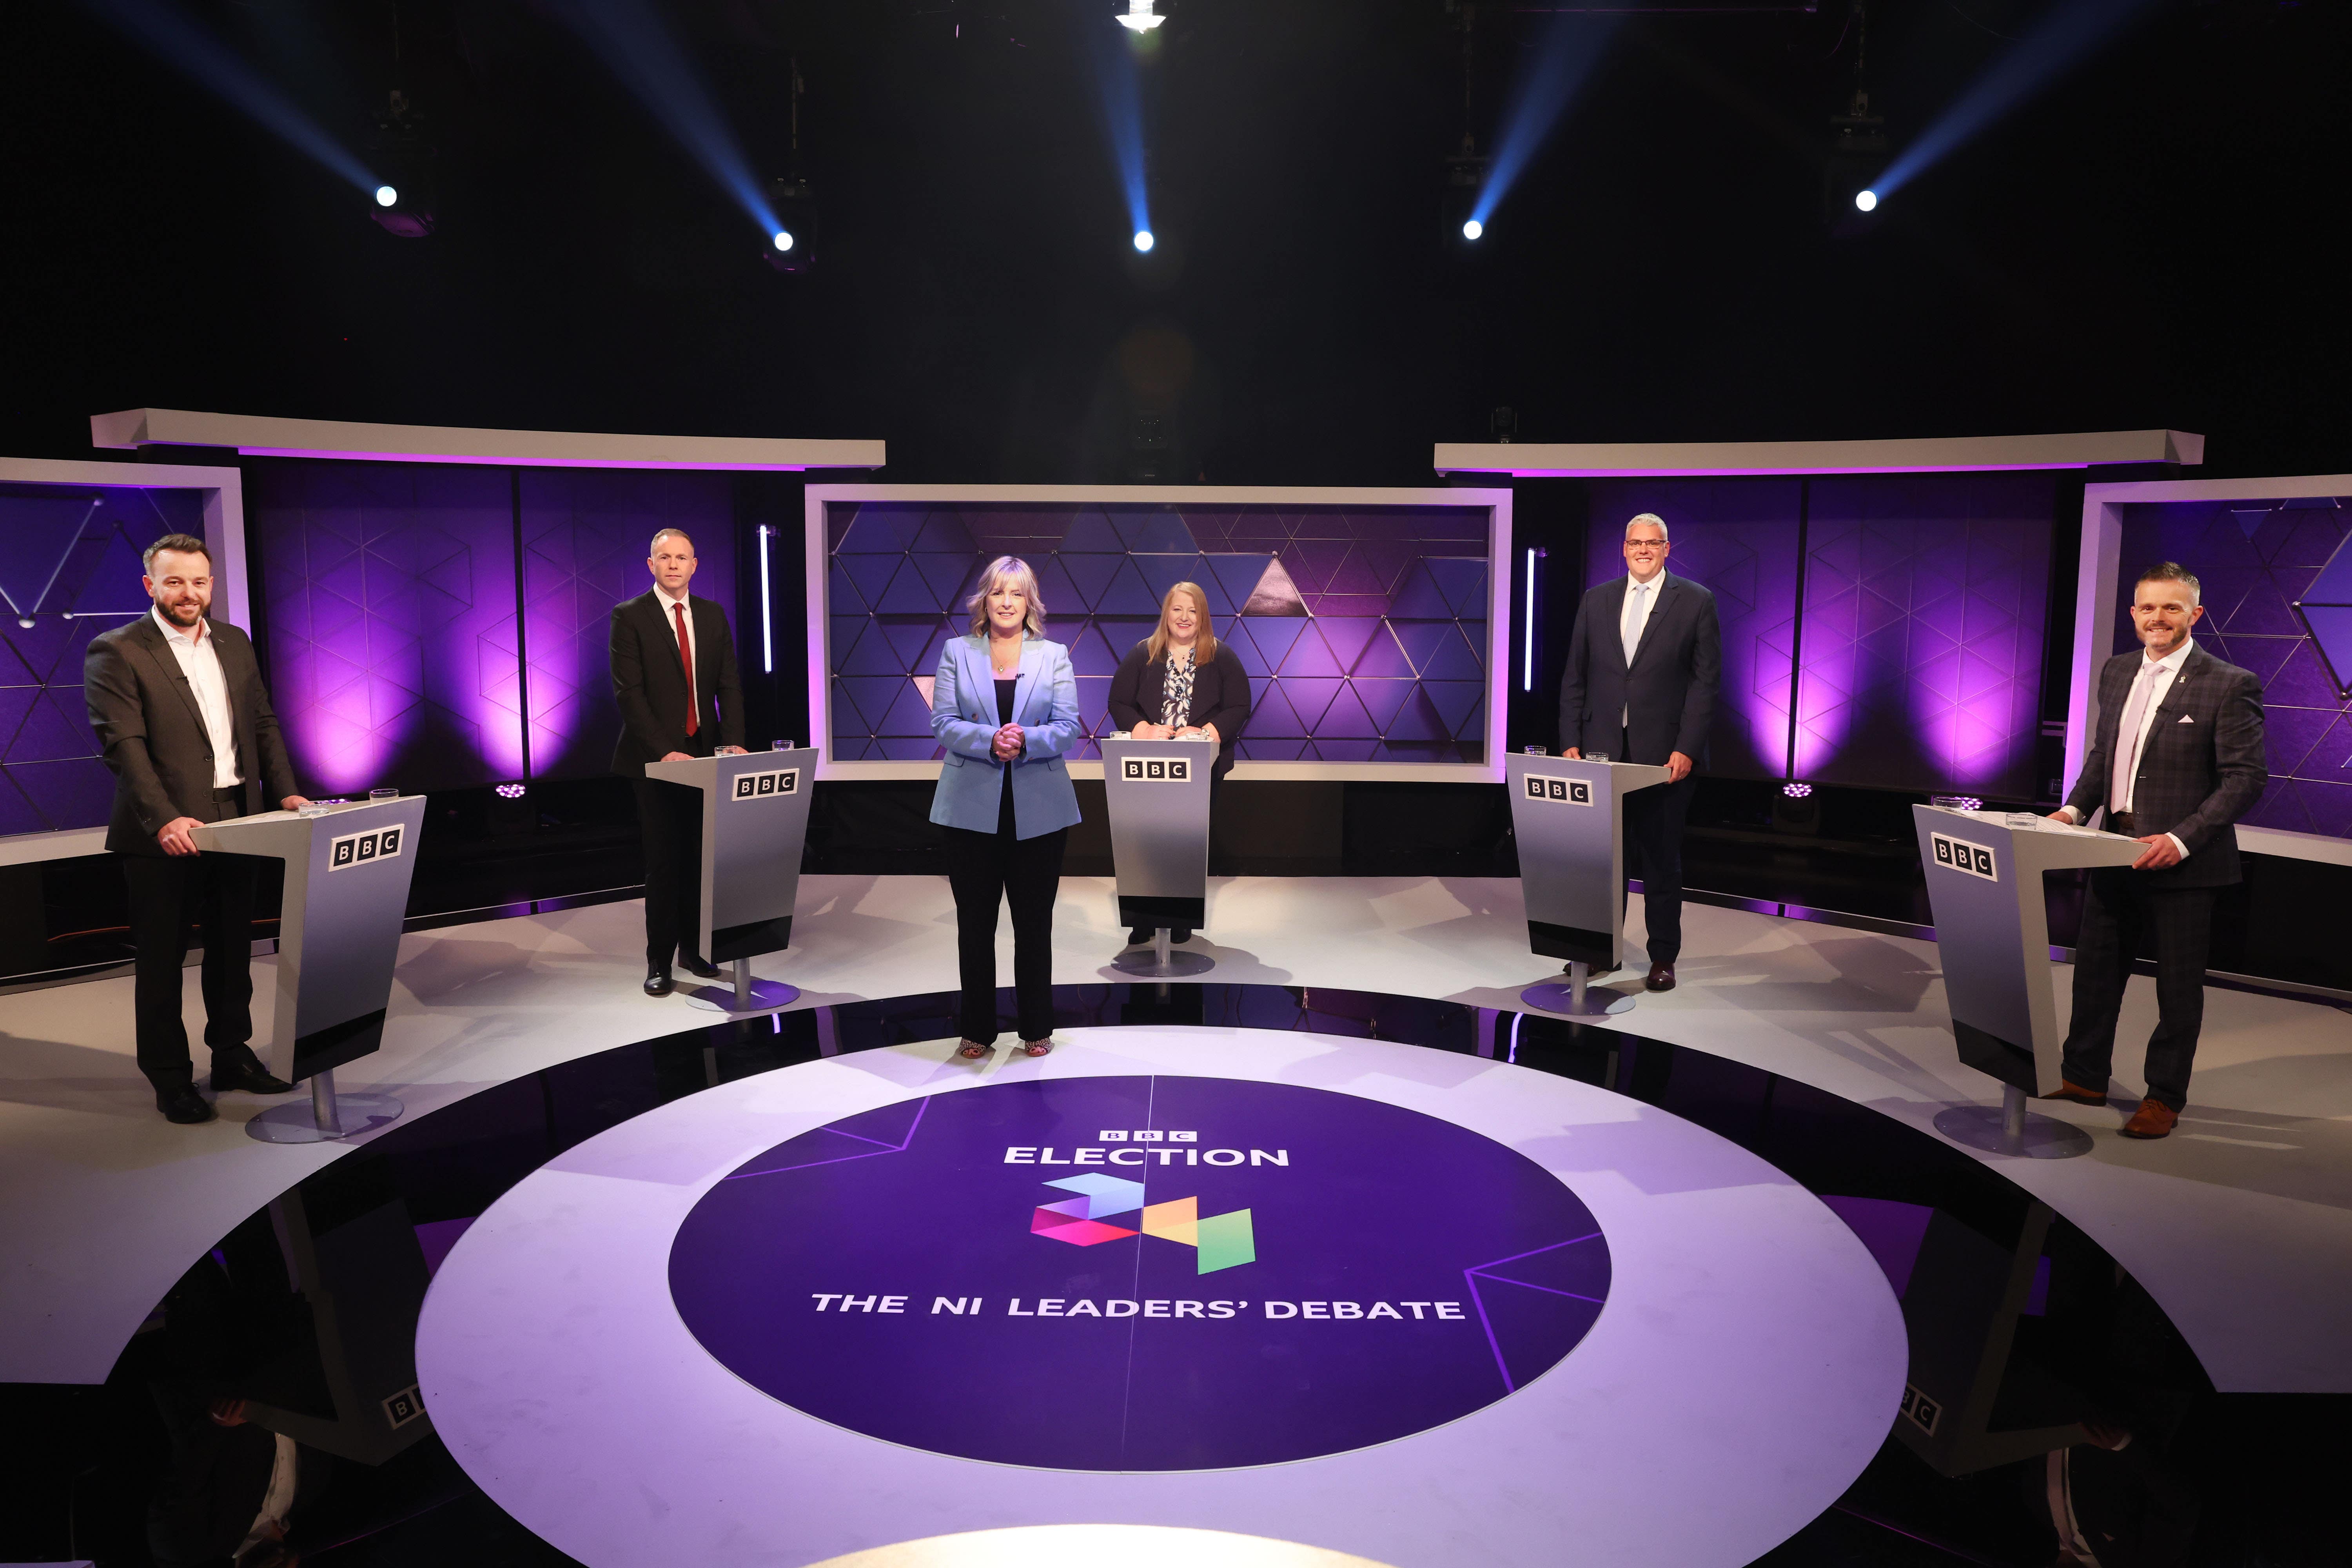 BBC NI Leaders’ Debate in Belfast with (left to right) SDLP Leader Colum Eastwood, Sinn Fein Chris Hazzard, Justice Minister and Alliance leader Naomi Long, DUP Leader Gavin Robinson, and Ulster Unionist Party deputy leader Robbie Butler (PA)